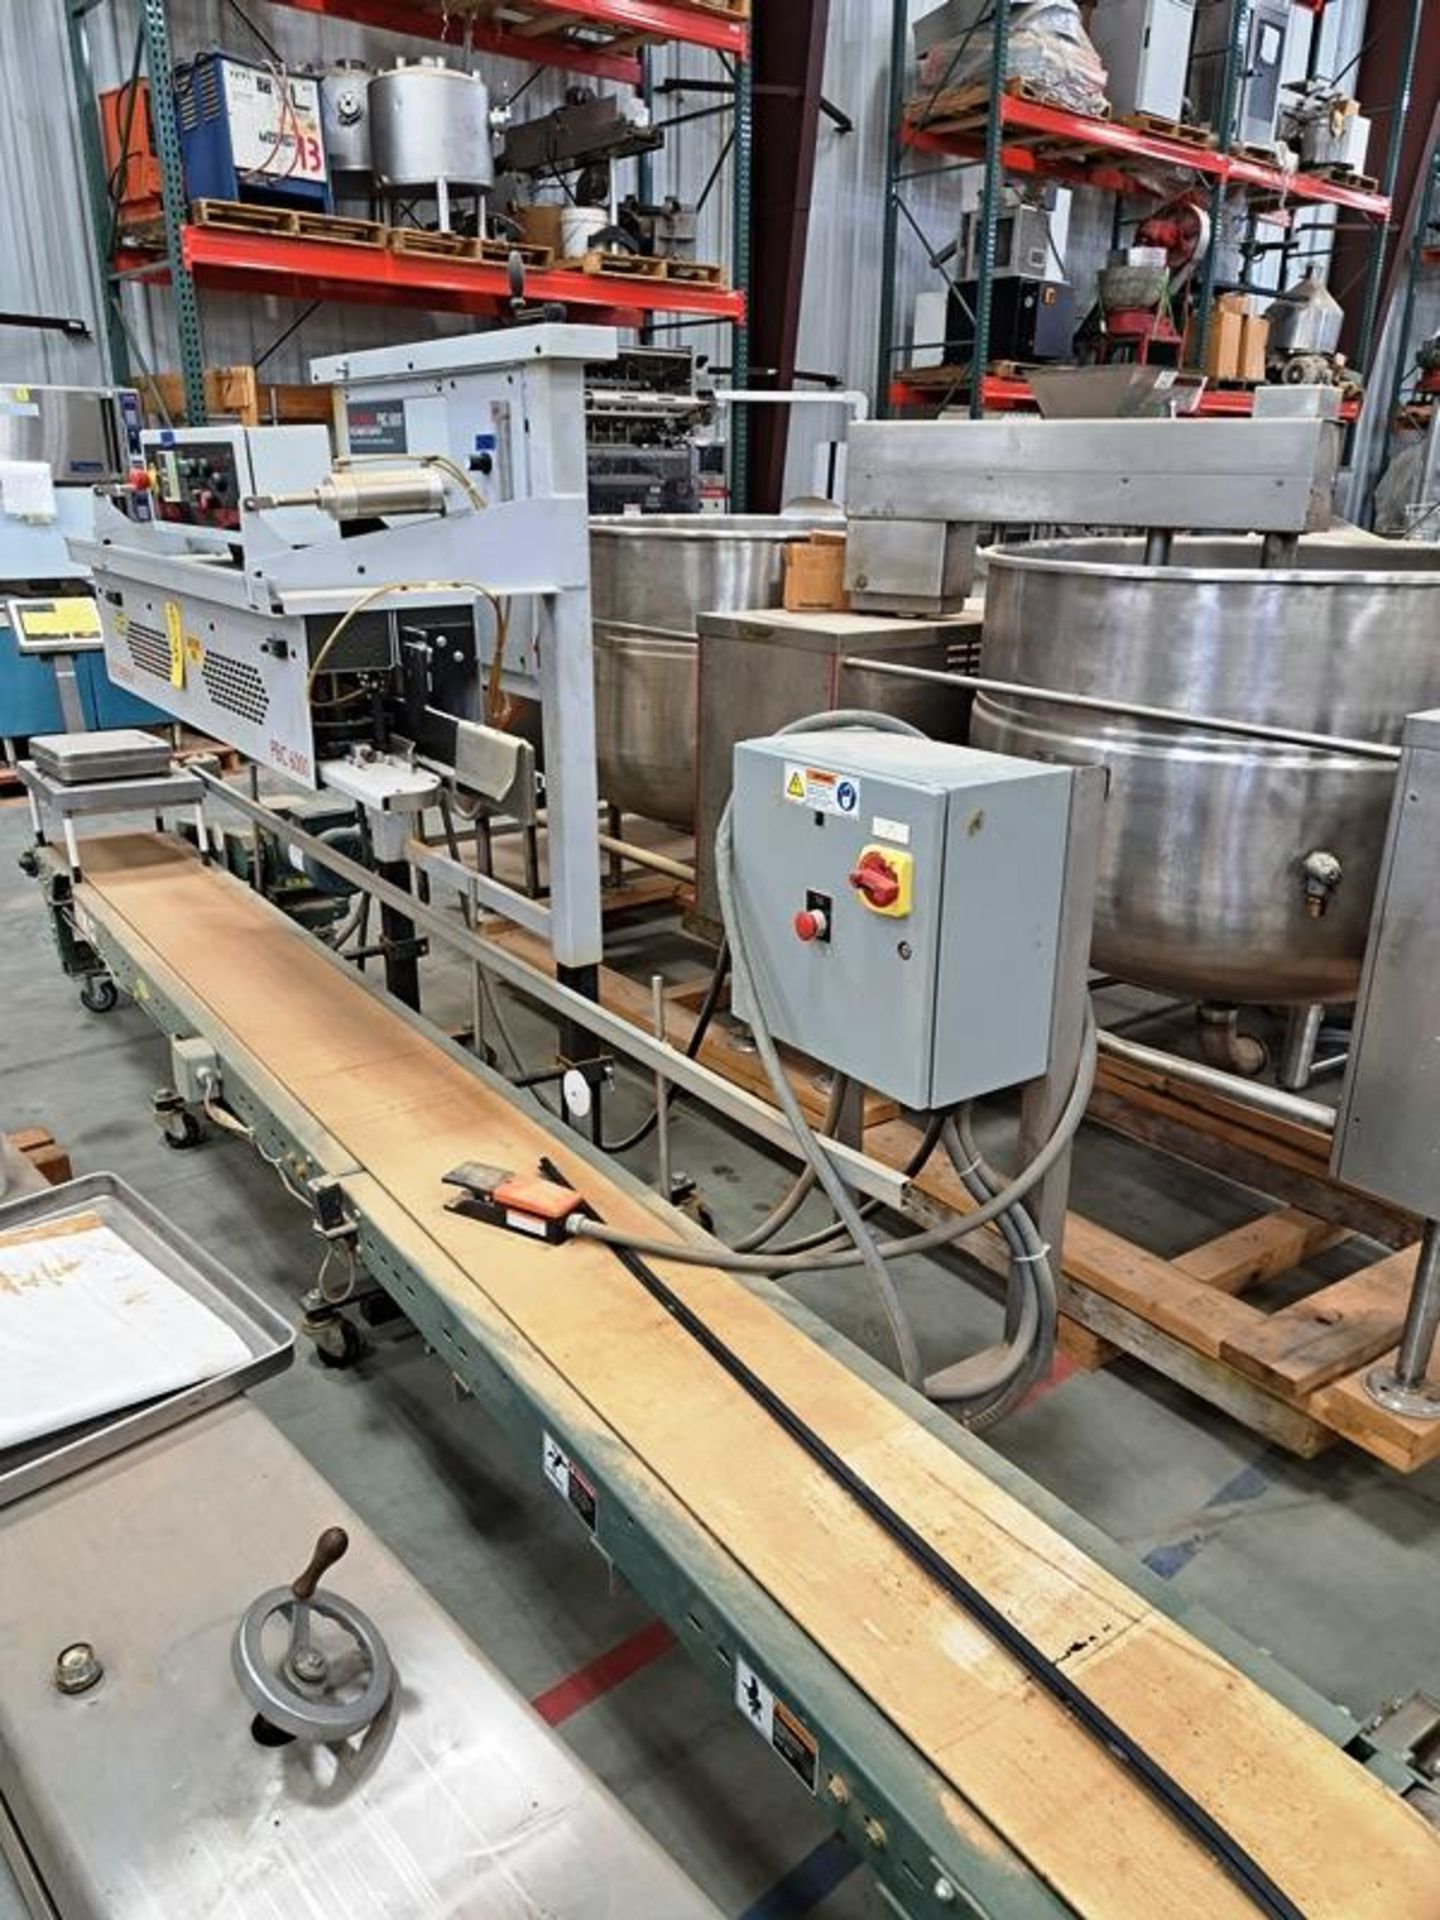 Fischbein Mdl. PBC6000 Continuous Band Sealer, manual controls, digital PBC151111101 readout, 12"